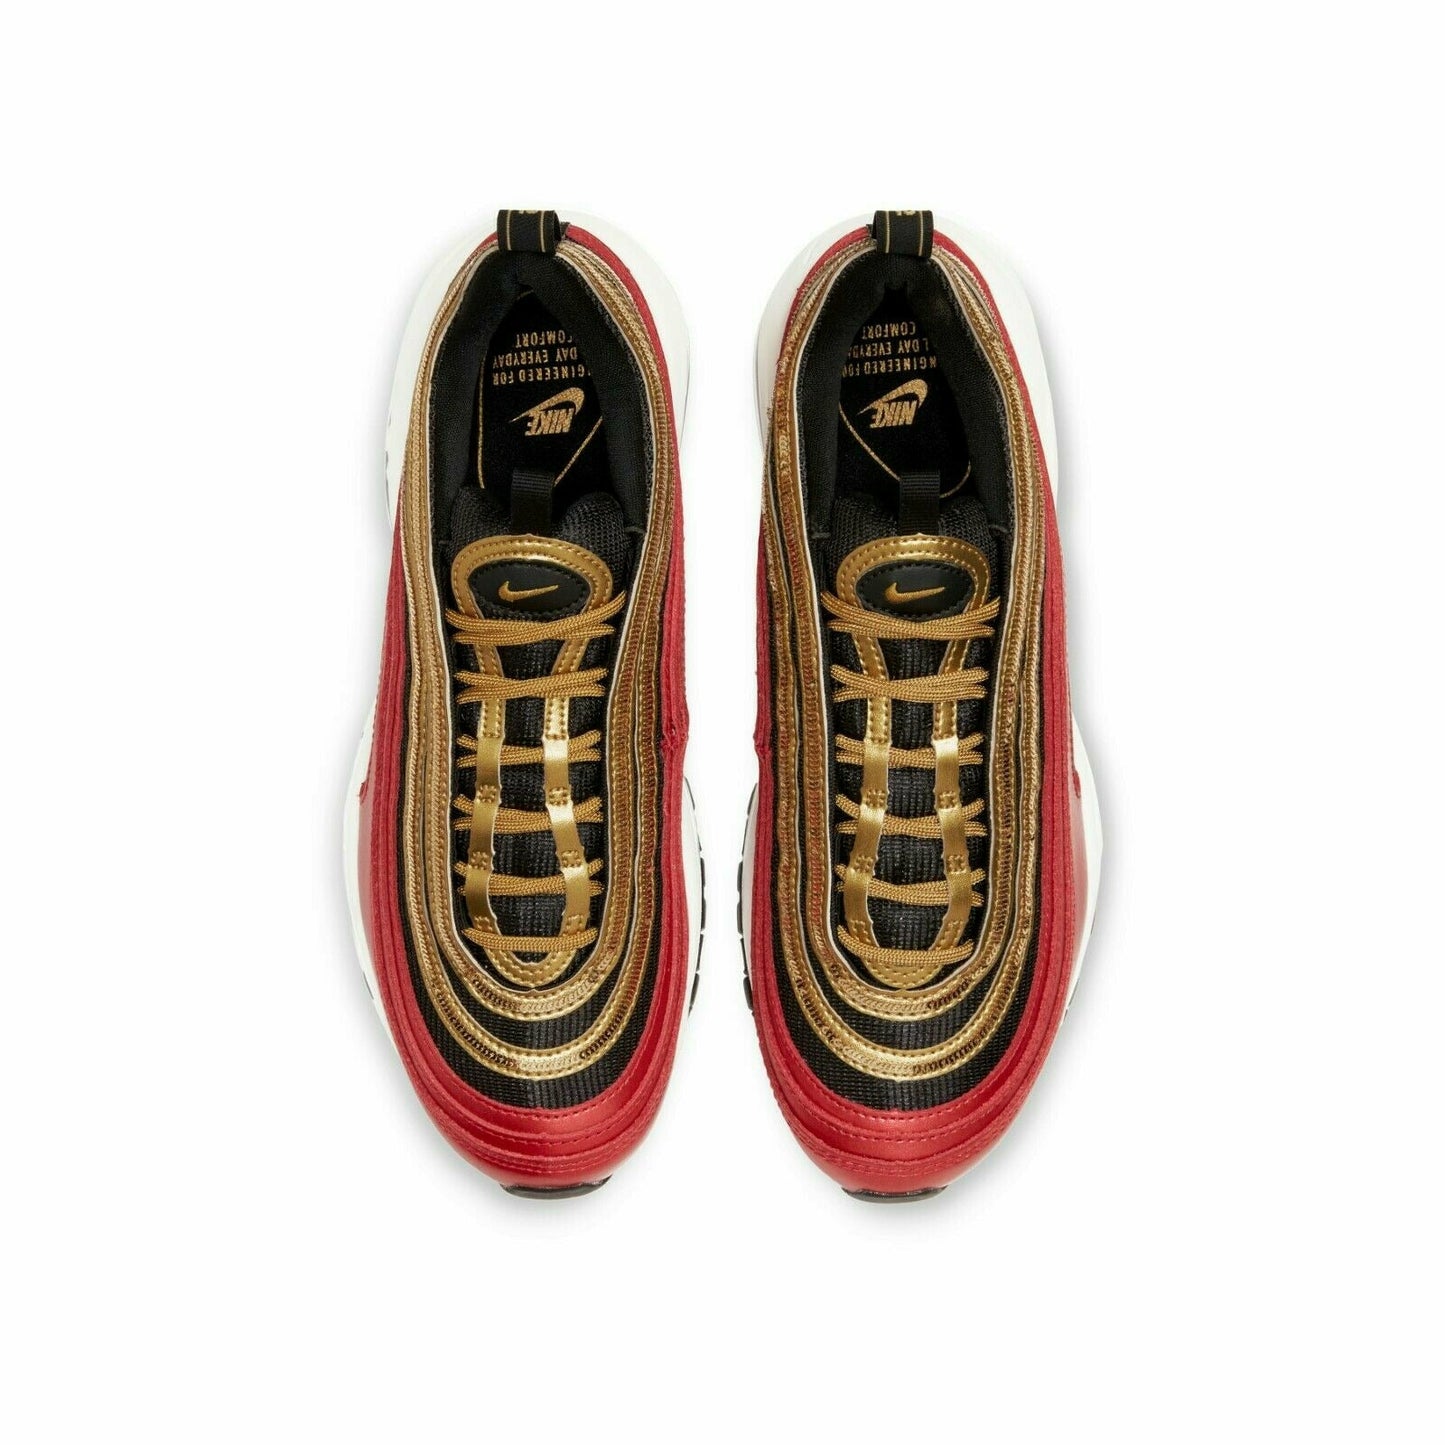 Nike Women's Air Max 97 Red Gold Sequin CT1148-600